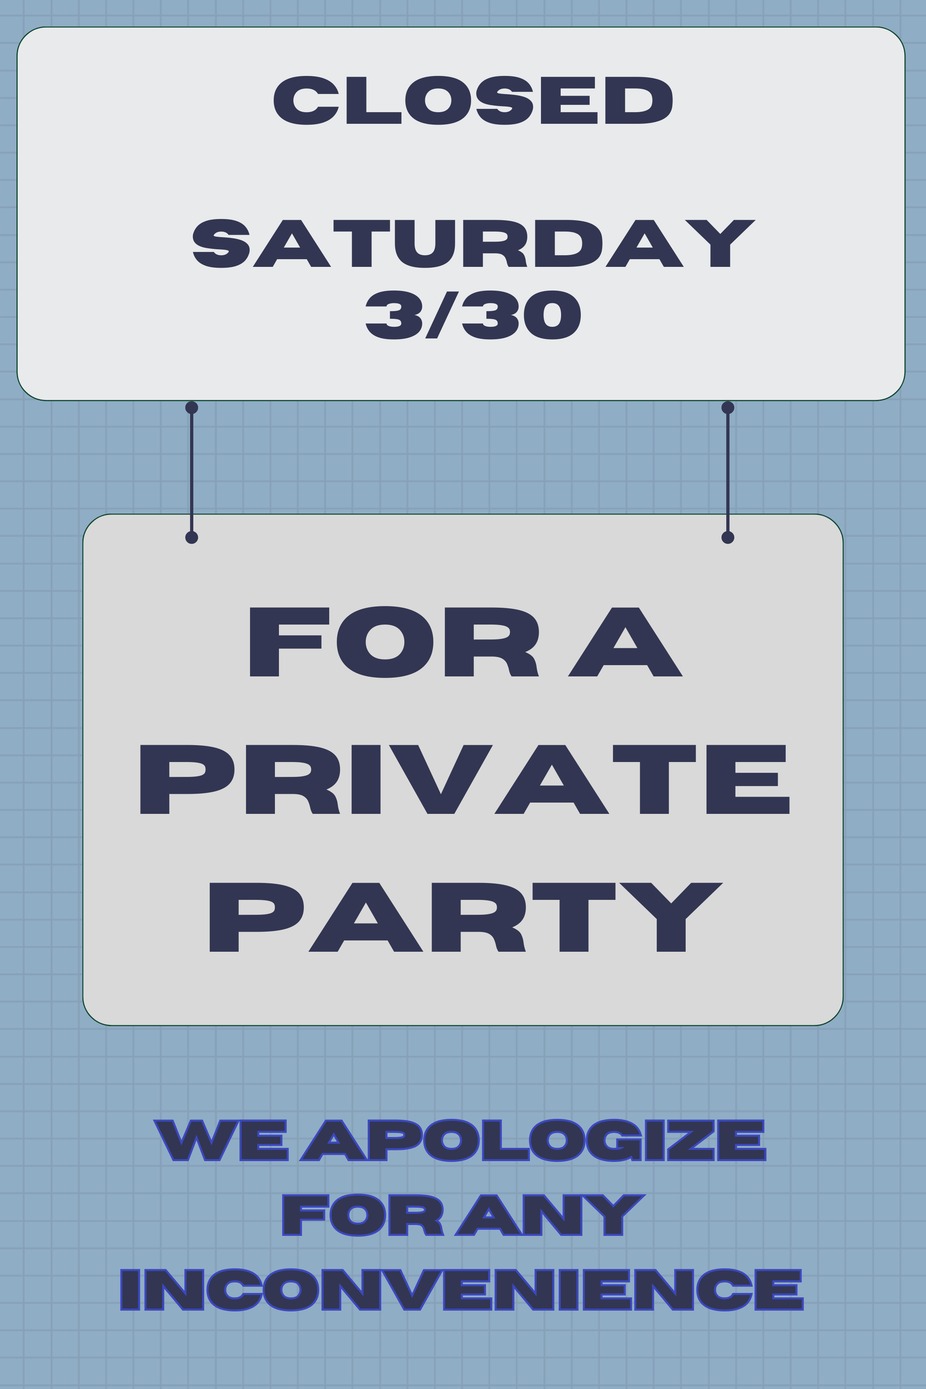 Closed Saturday 3/30 for a Private Party event photo